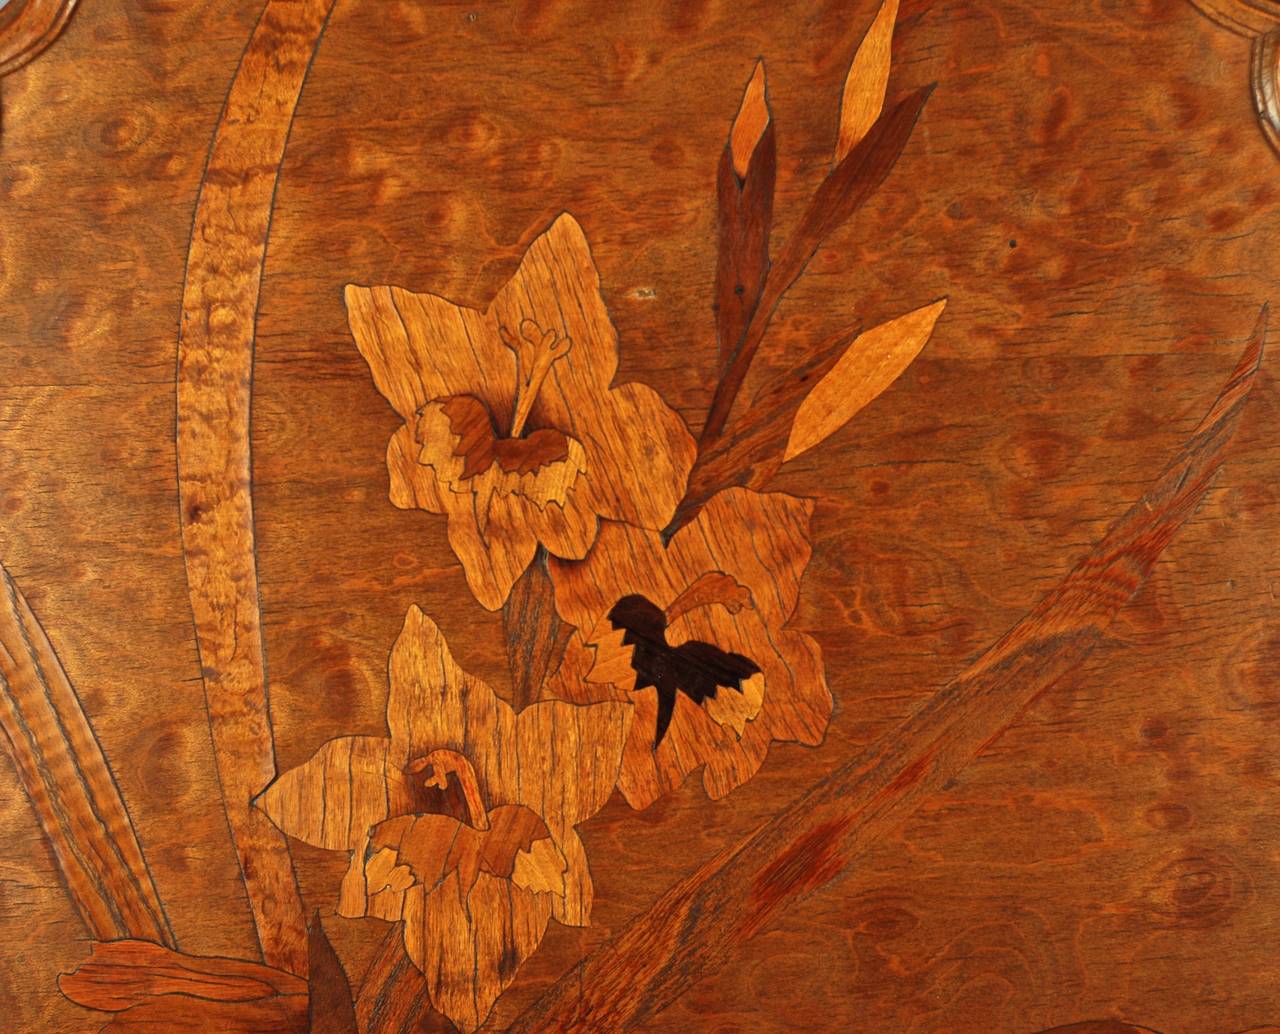 Carved Emile Gallé Art Nouveau Marquetry Fire Screen Panel with Iris Motif